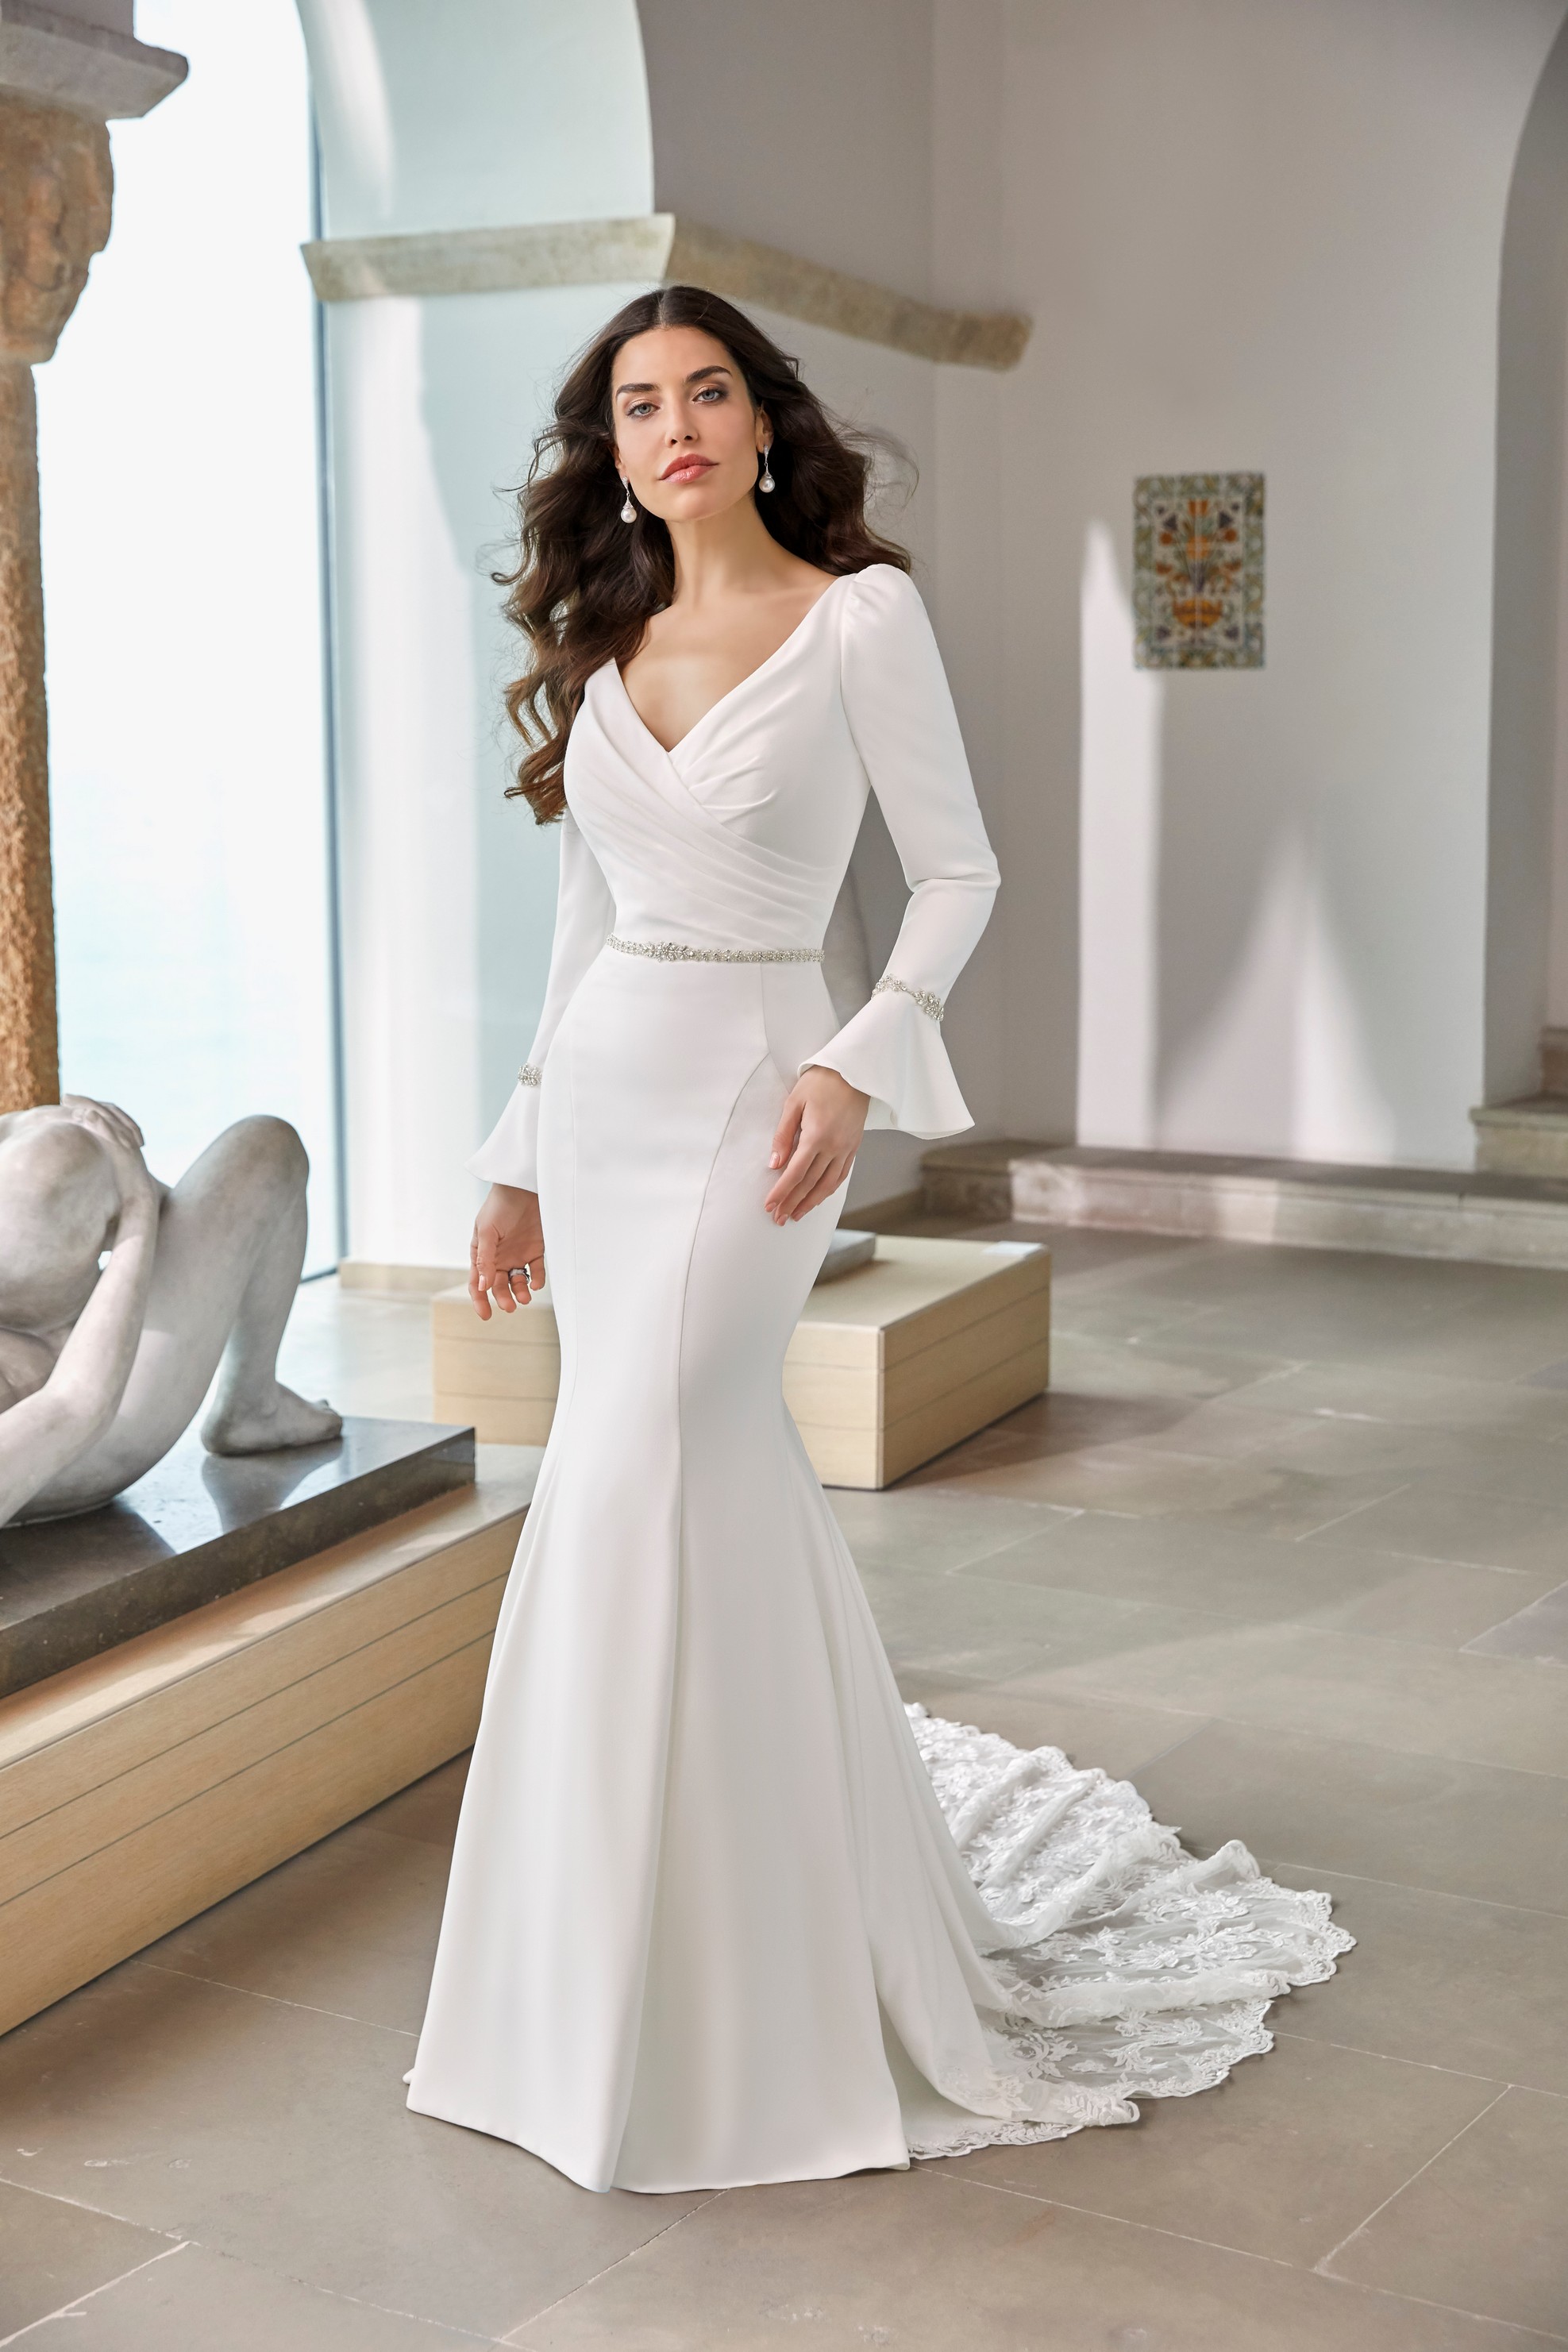 Model stood in an empty museum room in Ronald Joyce 69668, a long sleeved plain wedding dress with fluted cuffs, a sparkle belt, v-neckline and fit and flare skirt with lace train